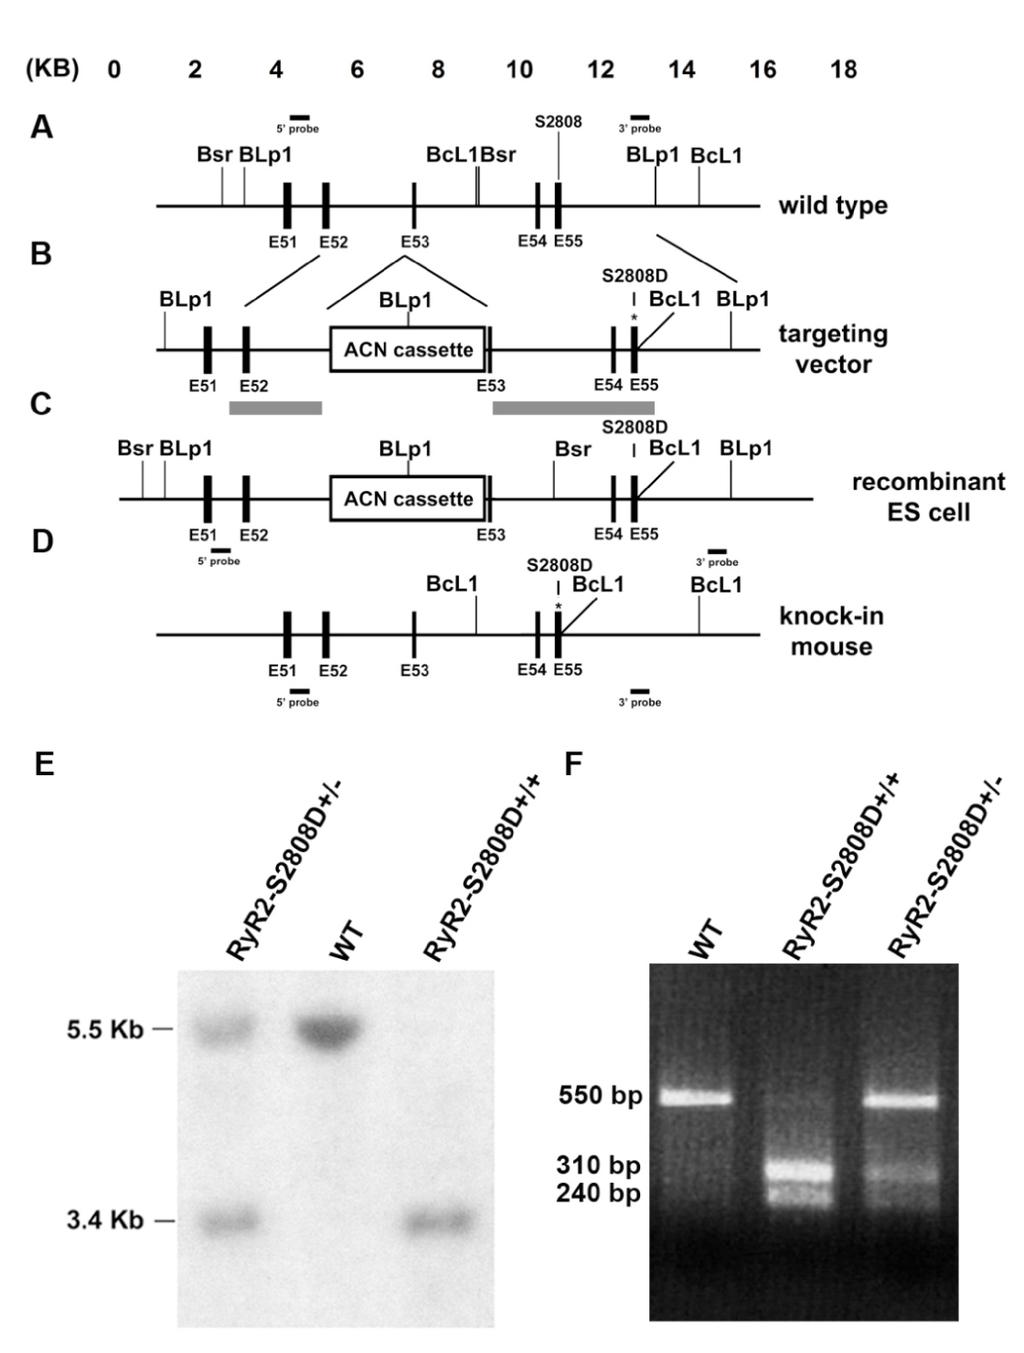 Supplemental Figure 1. Generation of RyR2-S2808D mice. (A) The wild-type locus of the murine RyR2 gene containing exons 51 55. (B) The targeting construct containing 2.4- and 5.